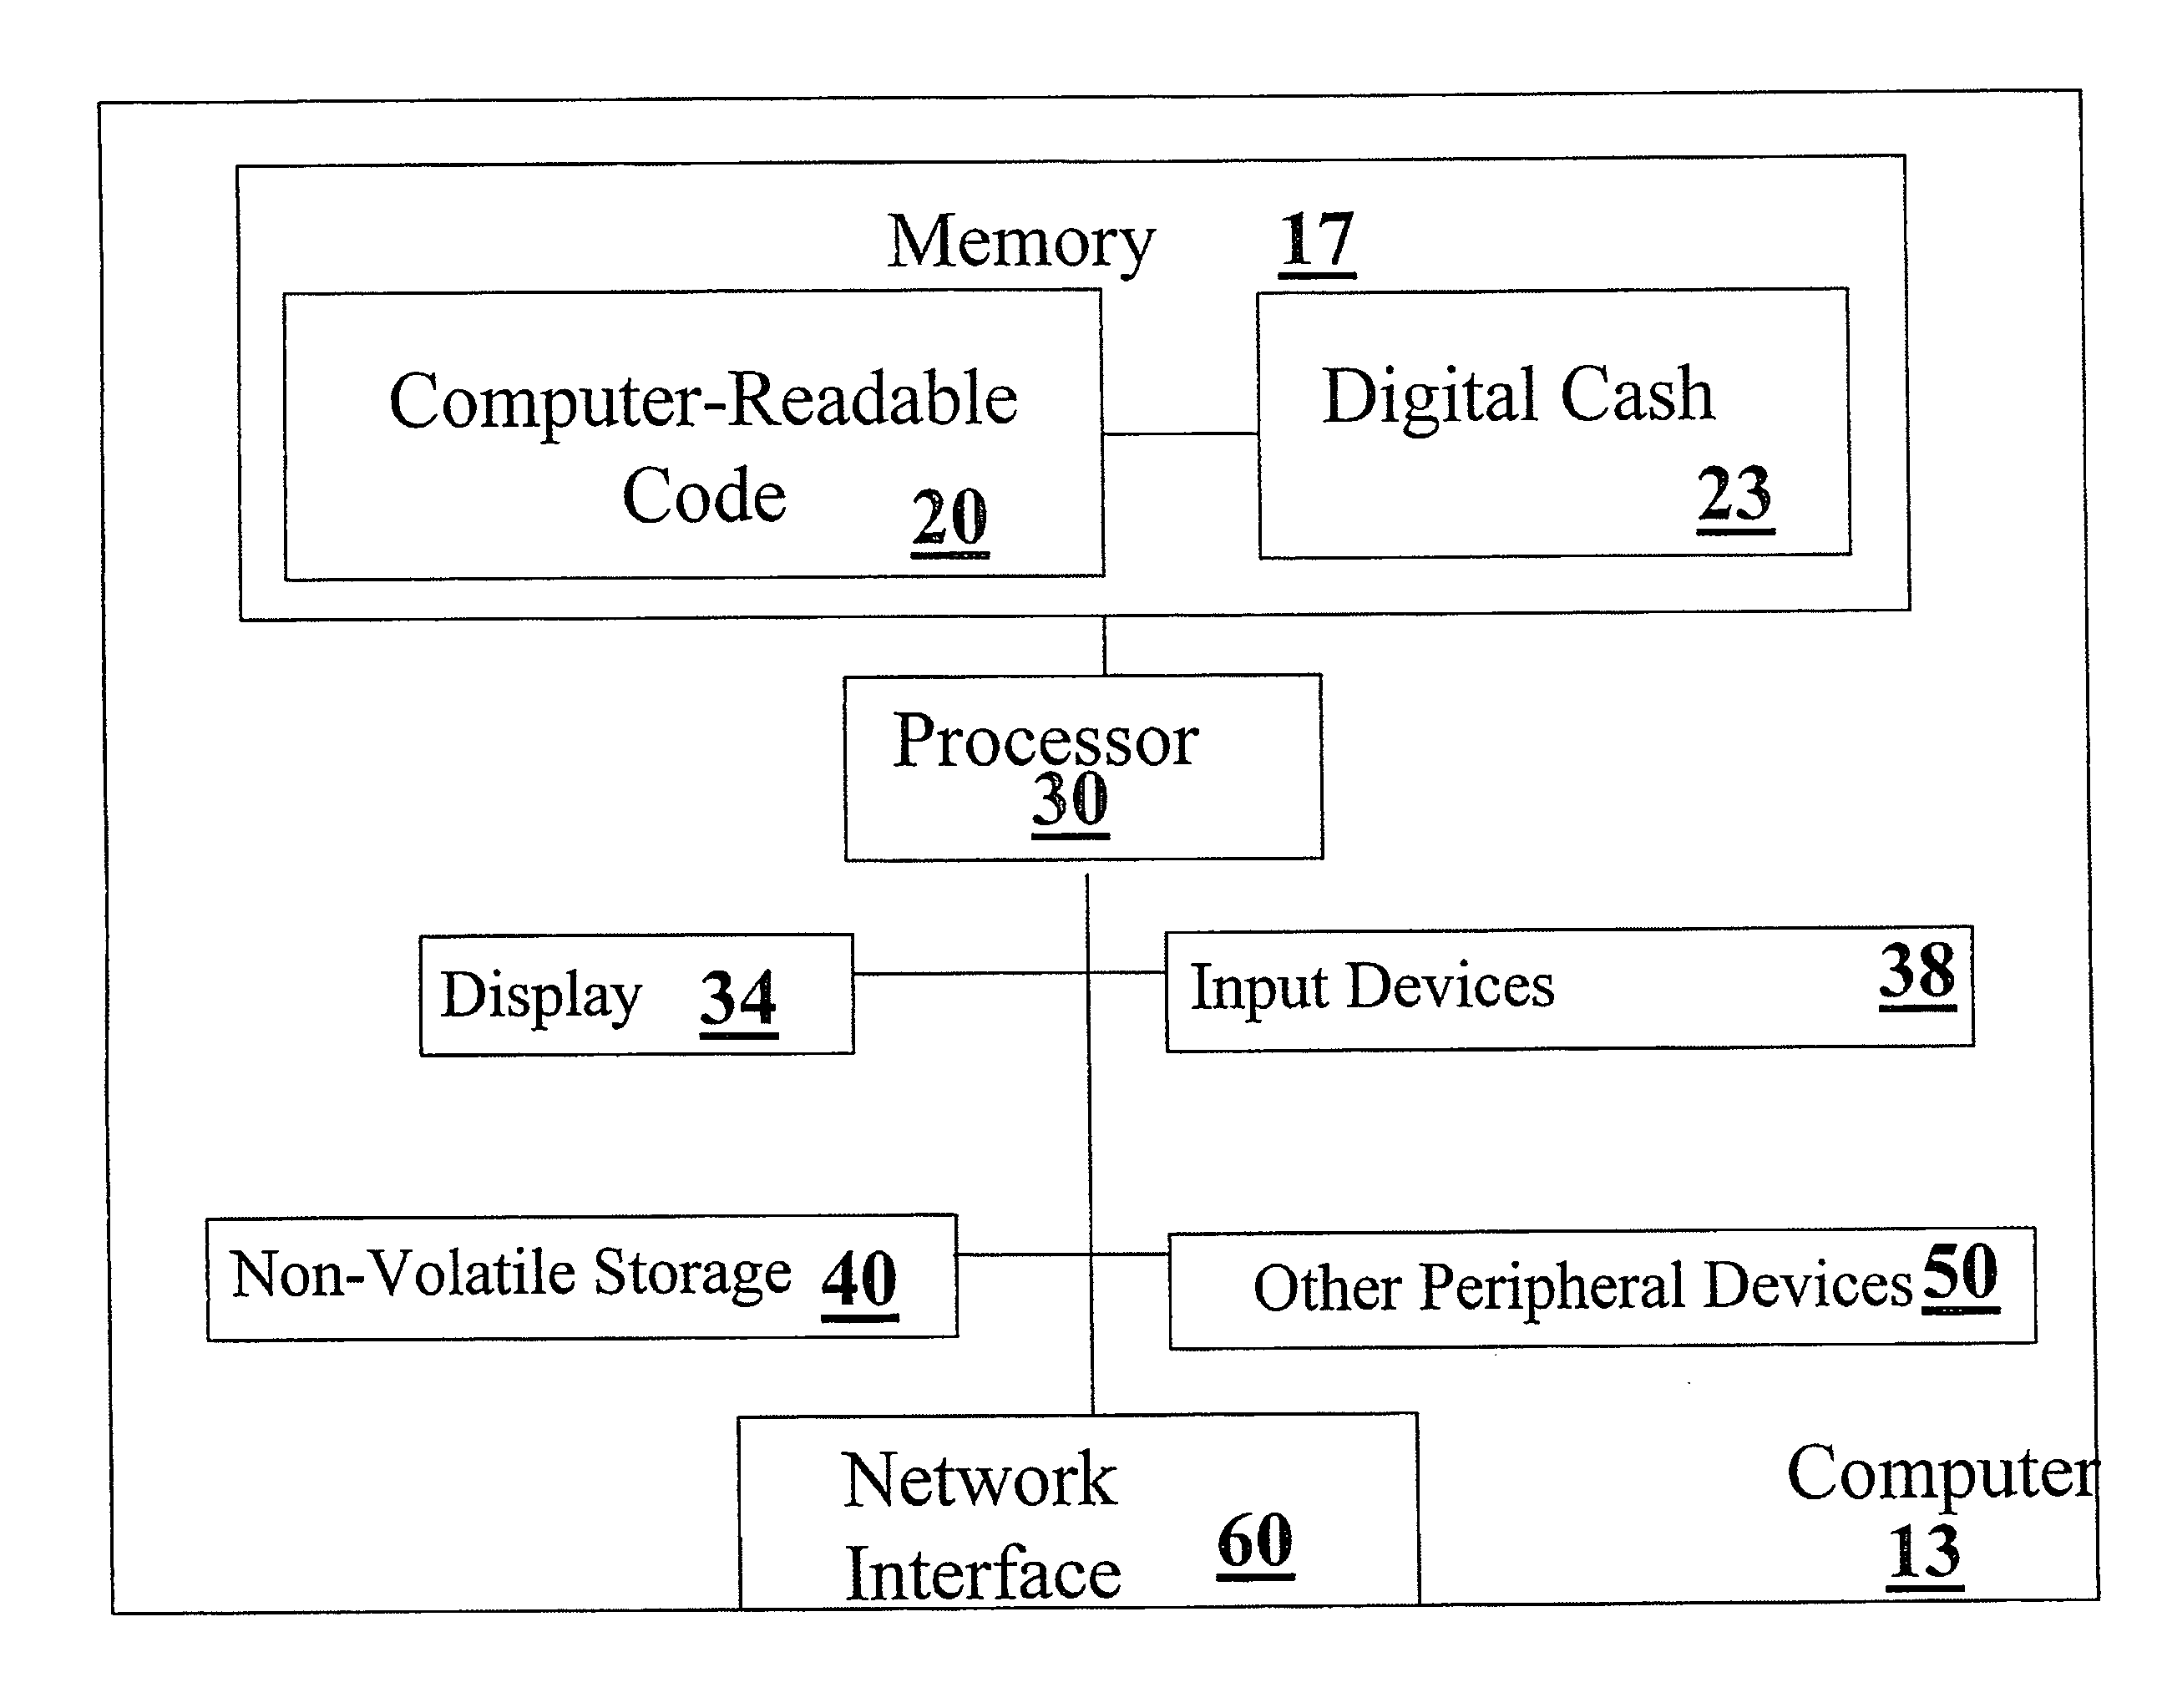 Systems, methods and computer readable code for visualizing and managing digital cash